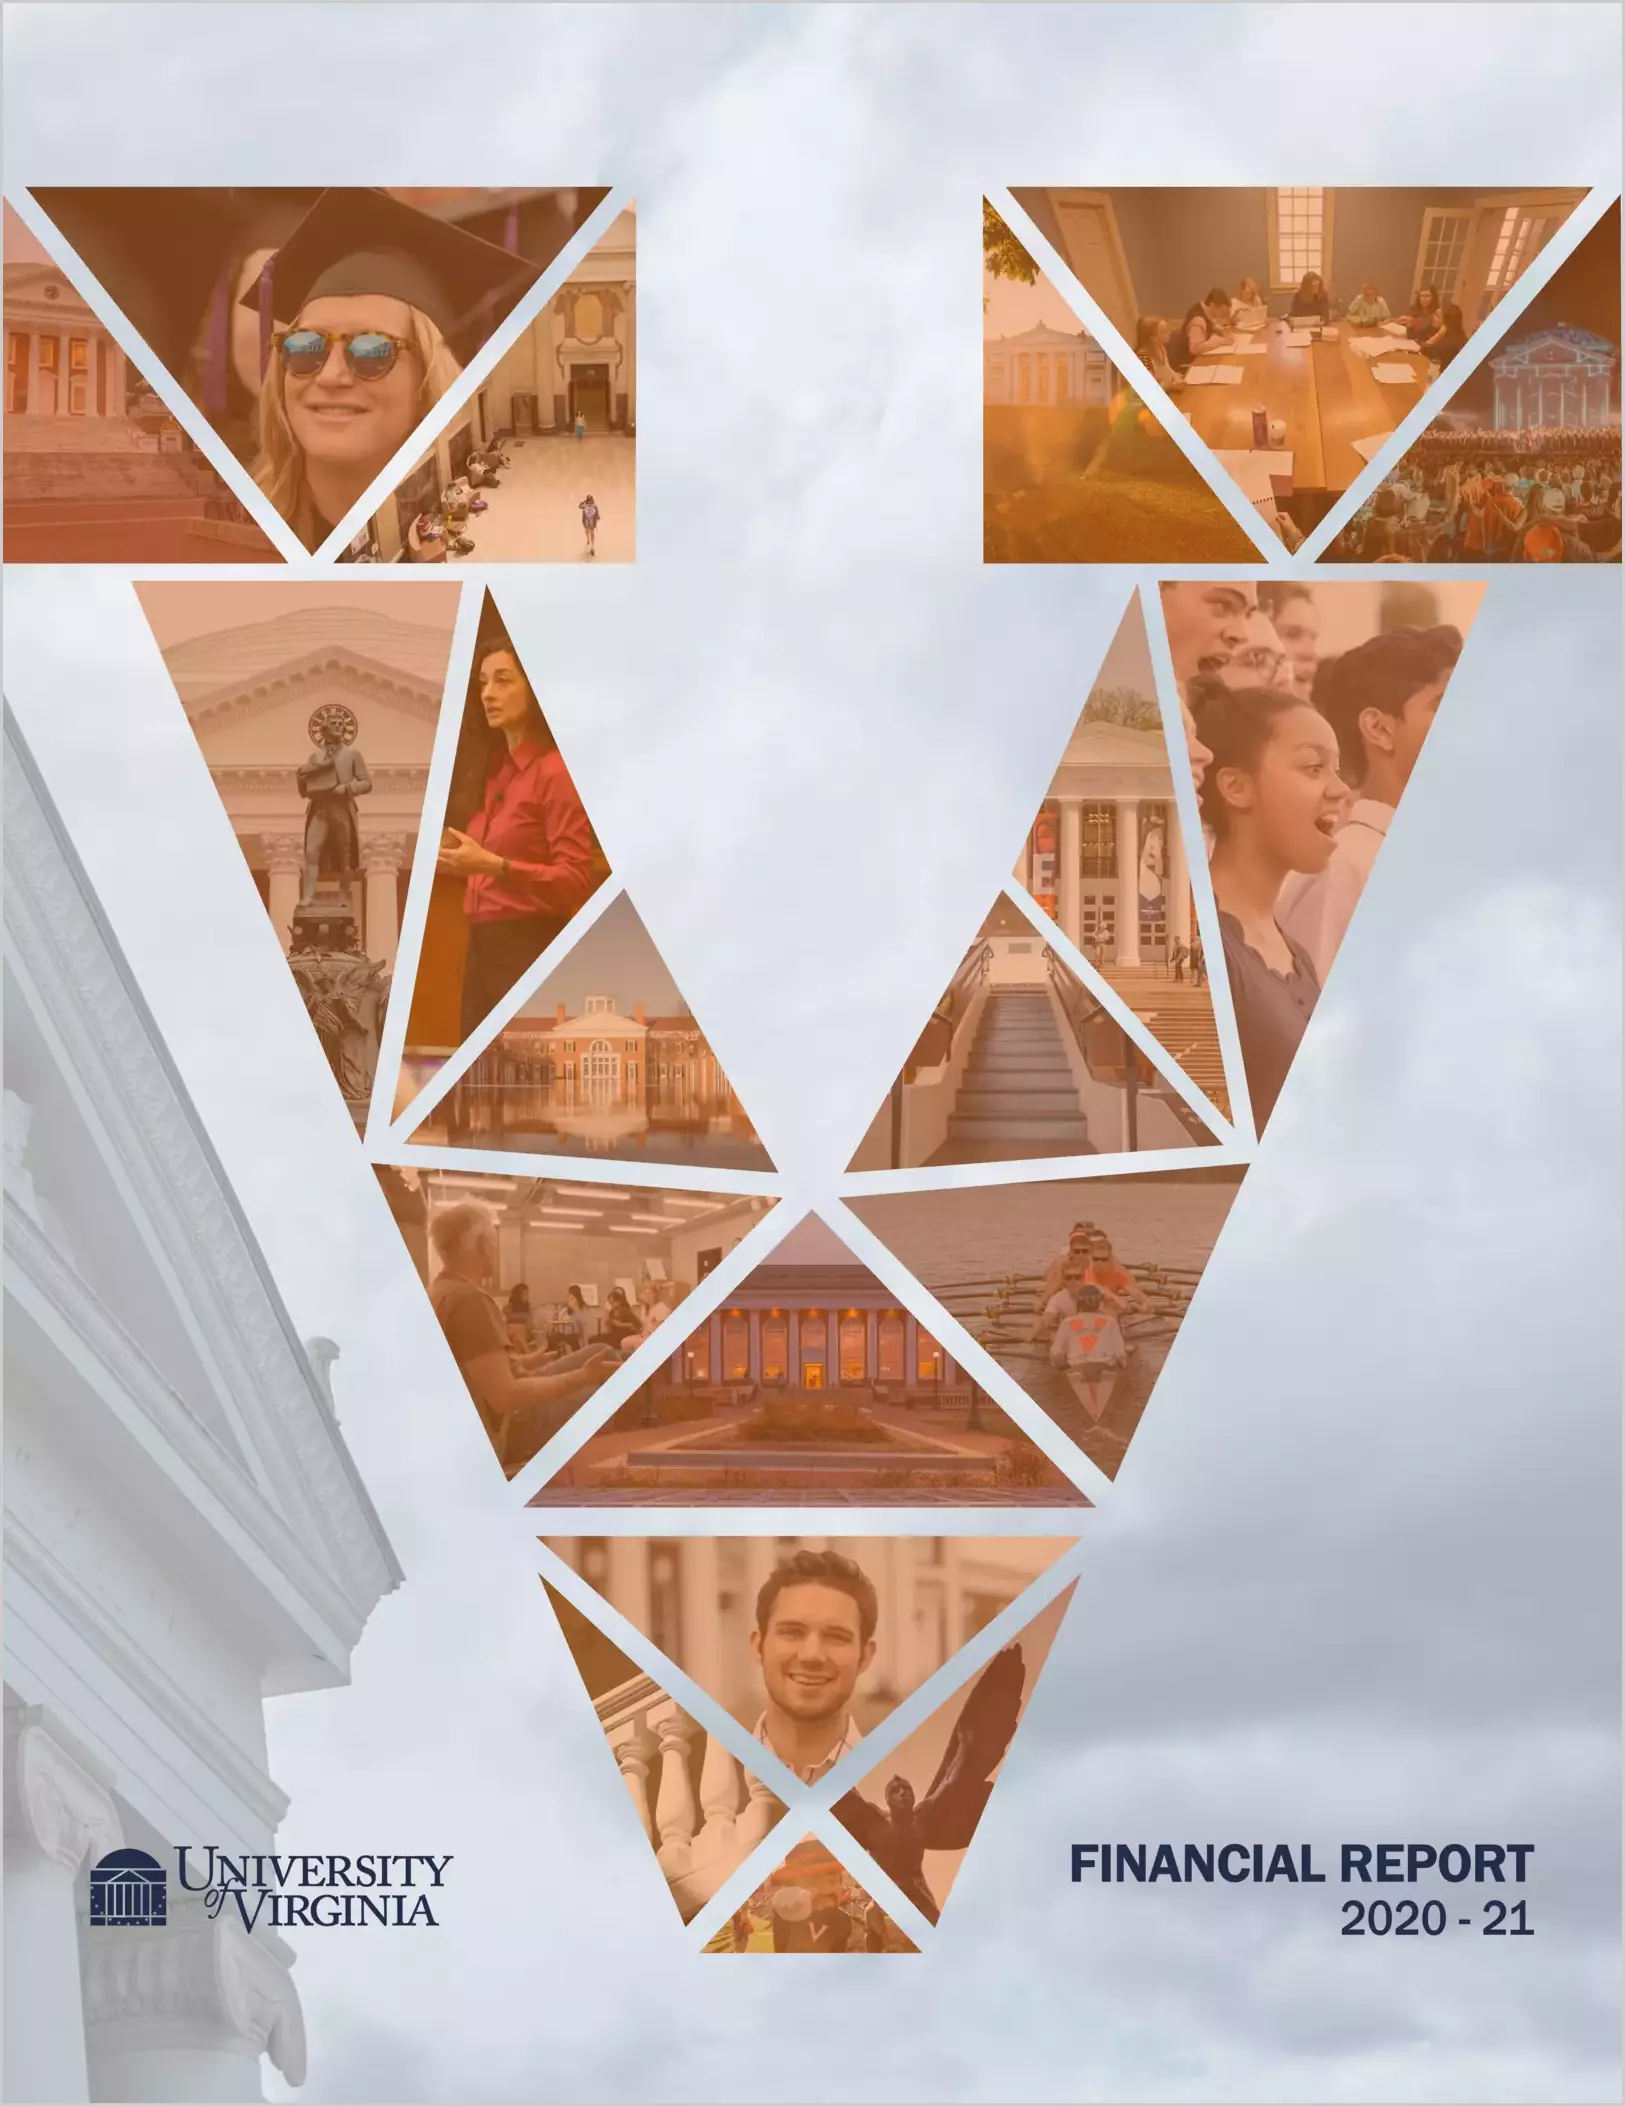 University of Virginia Financial Statements for the year ended June 30, 2021